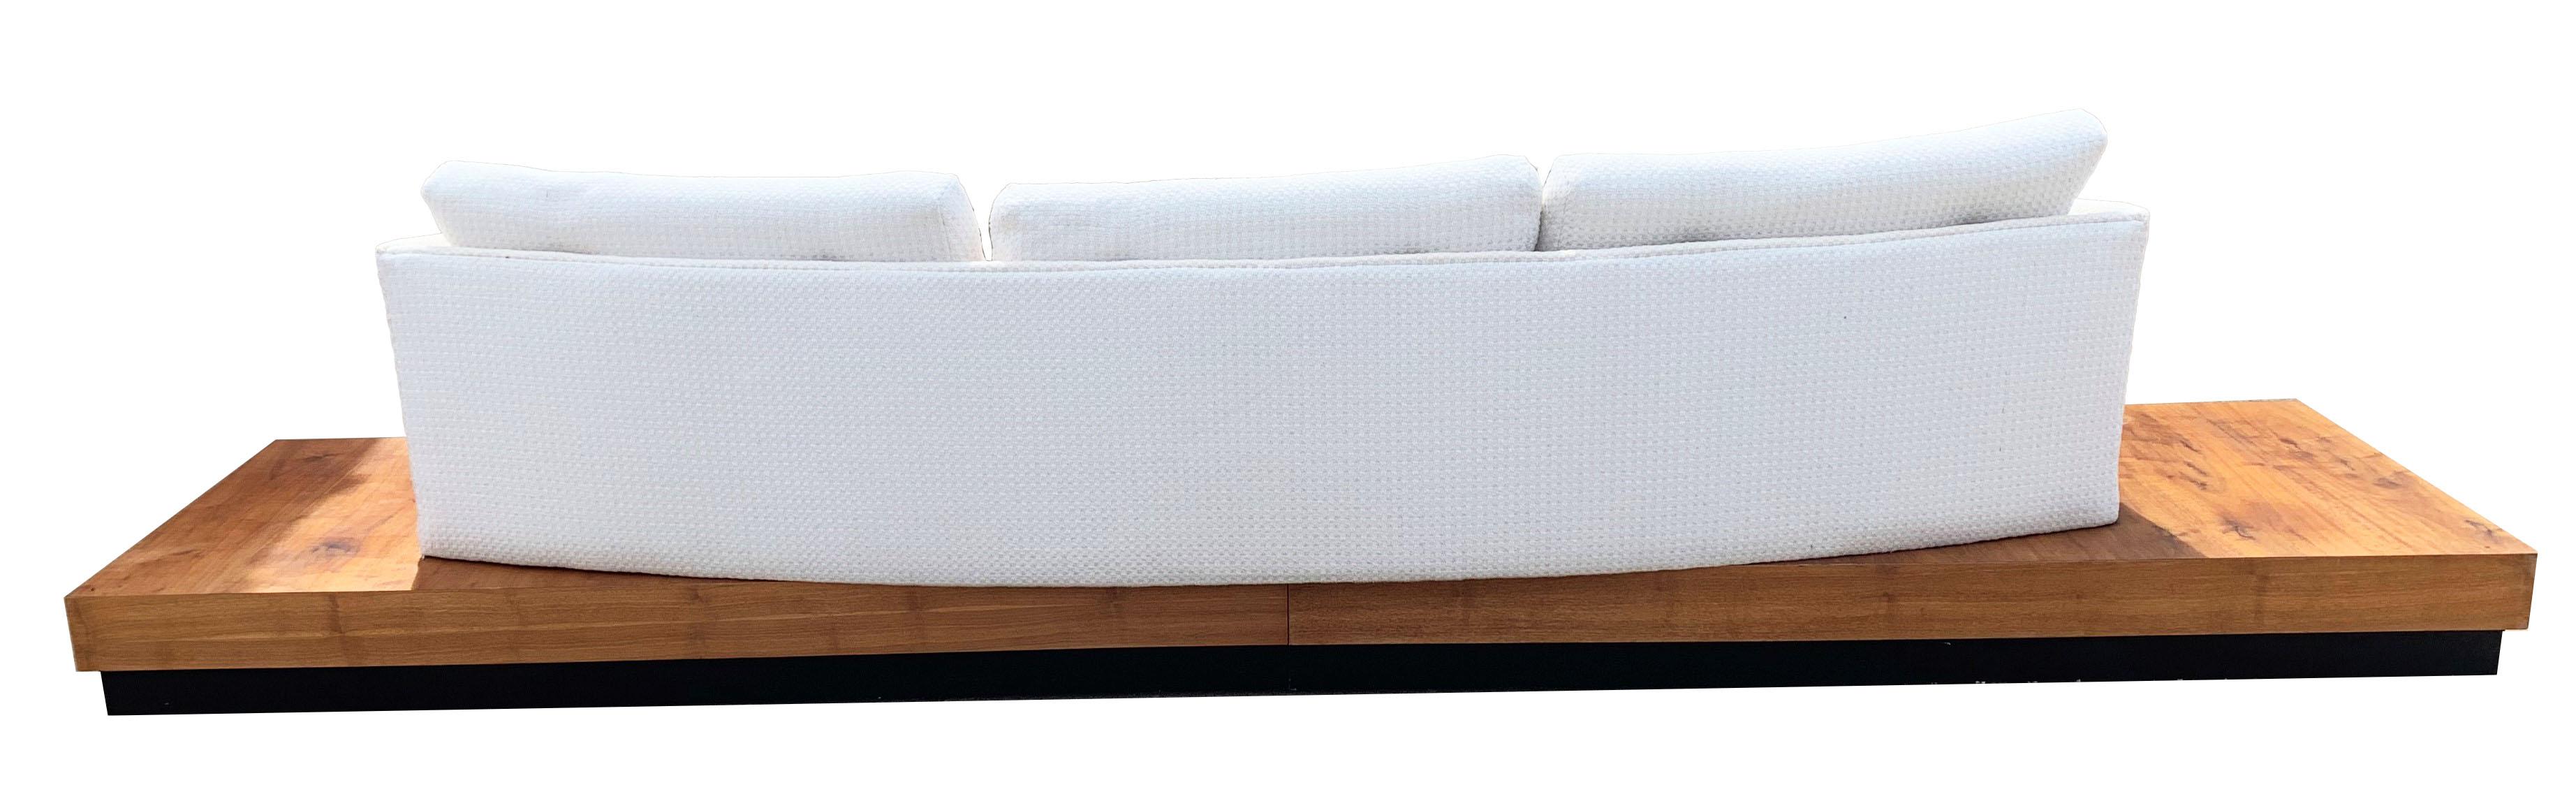 This Iconic and incredible low-profile Mid-Century Modern platform sofa is designed by Adrian Pearsall for Craft Associates. The back of the sofa is curved and sits on an amazing walnut plinth base. The piece is Fully reupholstered and in excellent